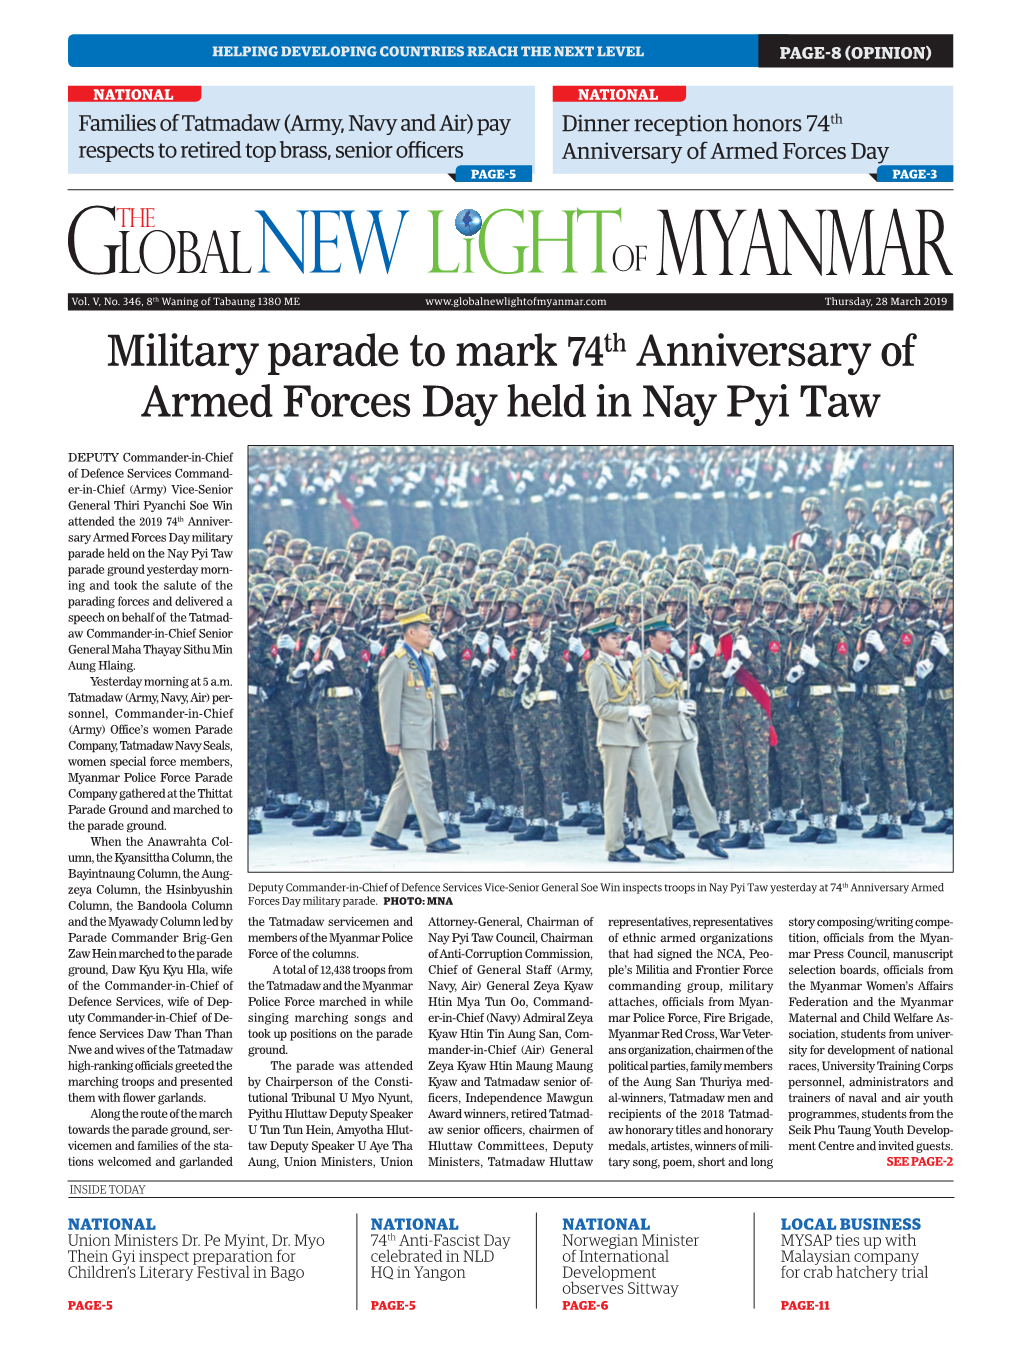 Military Parade to Mark 74Th Anniversary of Armed Forces Day Held in Nay Pyi Taw